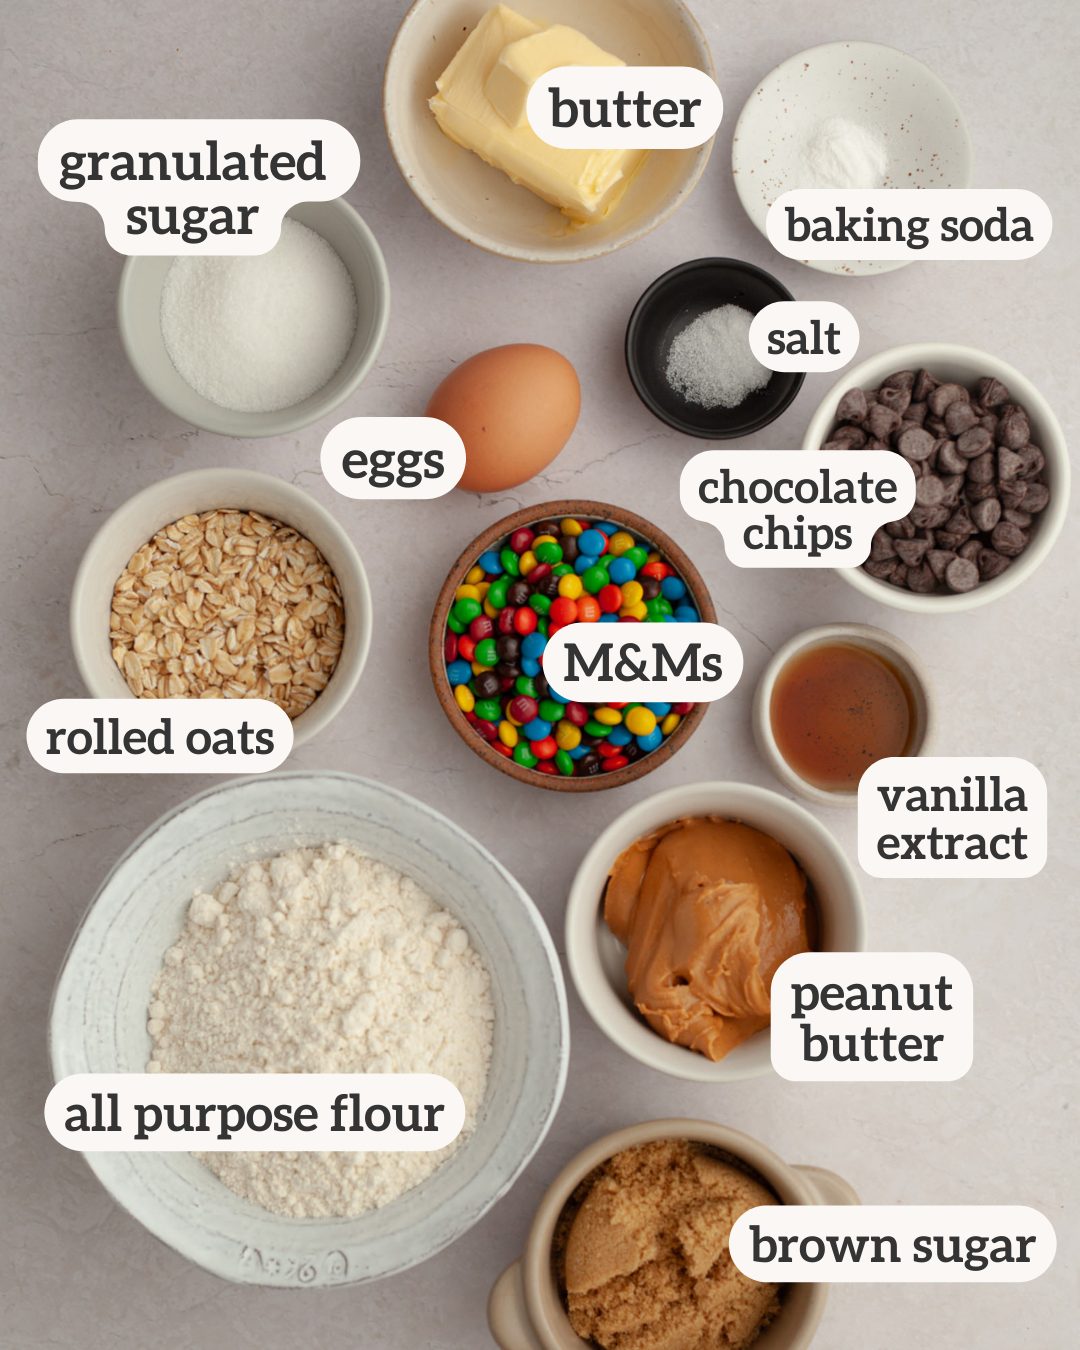 Ingredients for the monster cookie recipe with labels on each ingredient